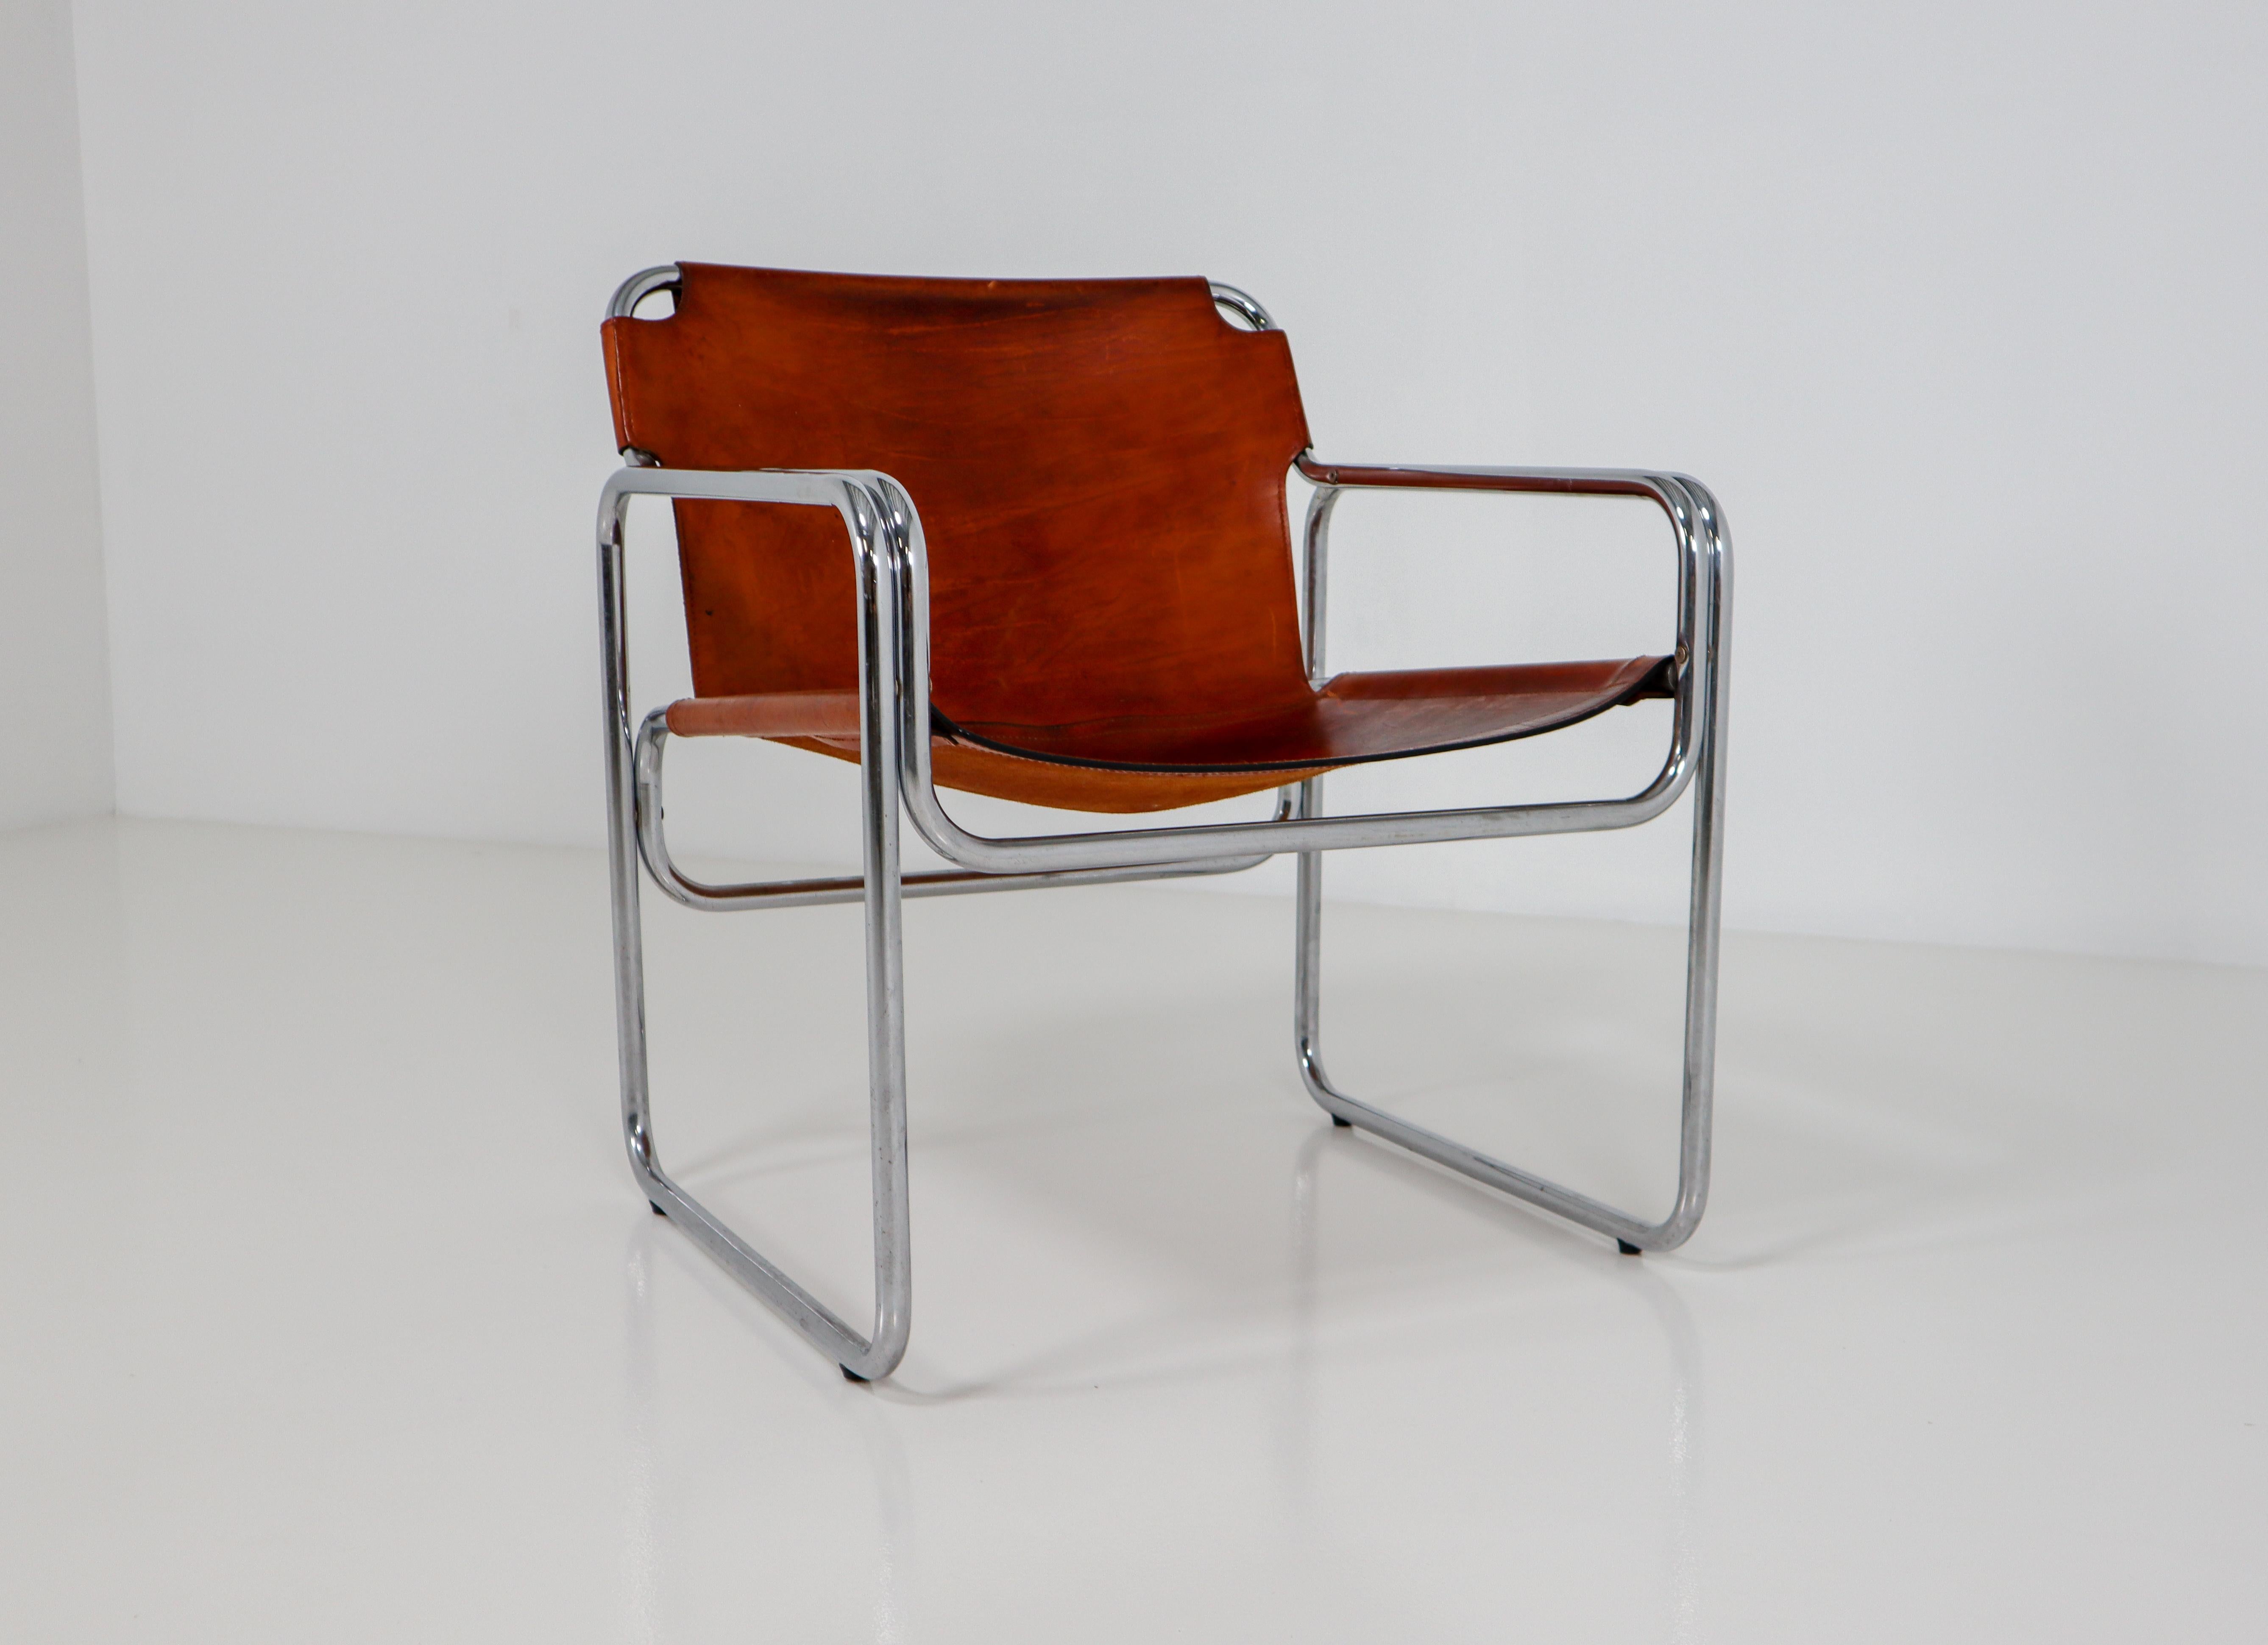 Mid-20th Century 1960 Bauhaus-Style Tubelar Chair in Saddle Leather